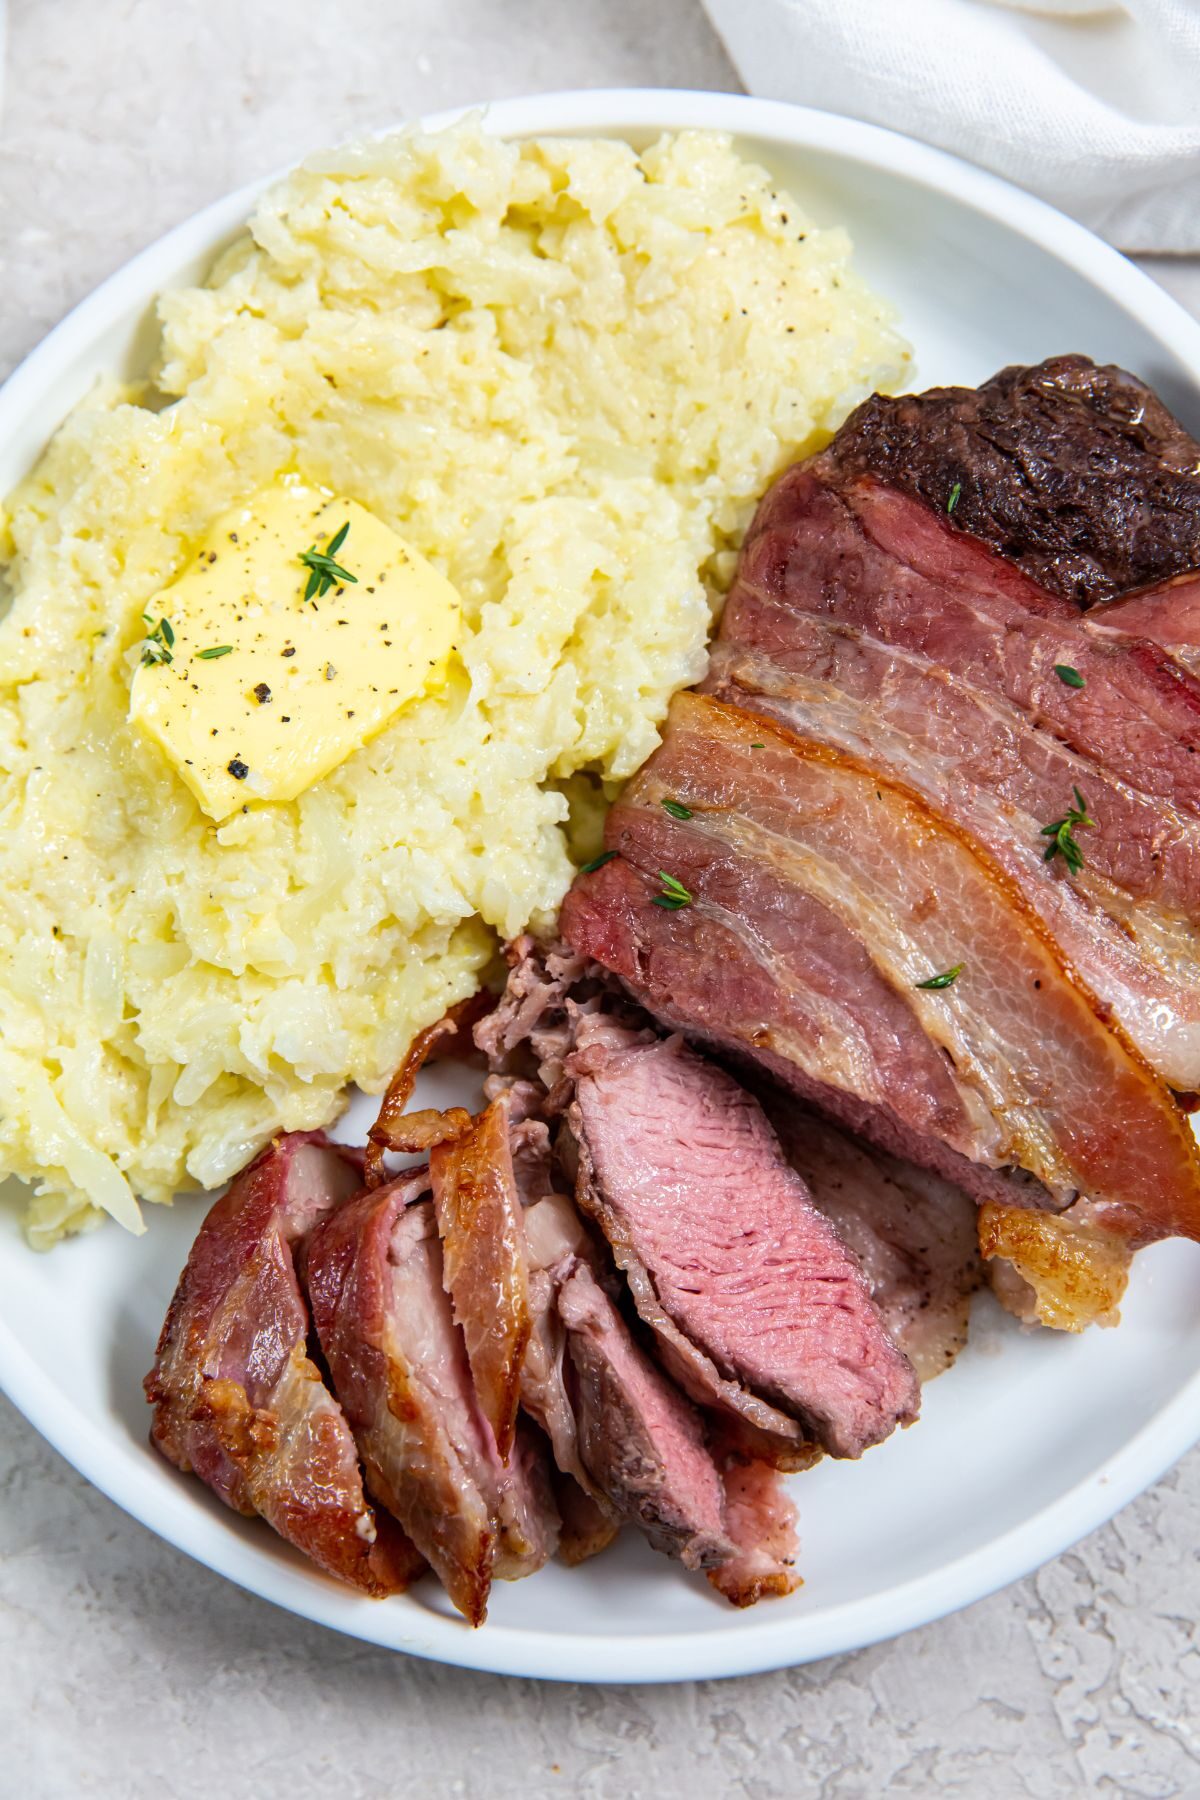 Sliced Air fryer Bacon Wrapped Ribeye Steak with a side of cheesy mashed cauliflower on a white plate